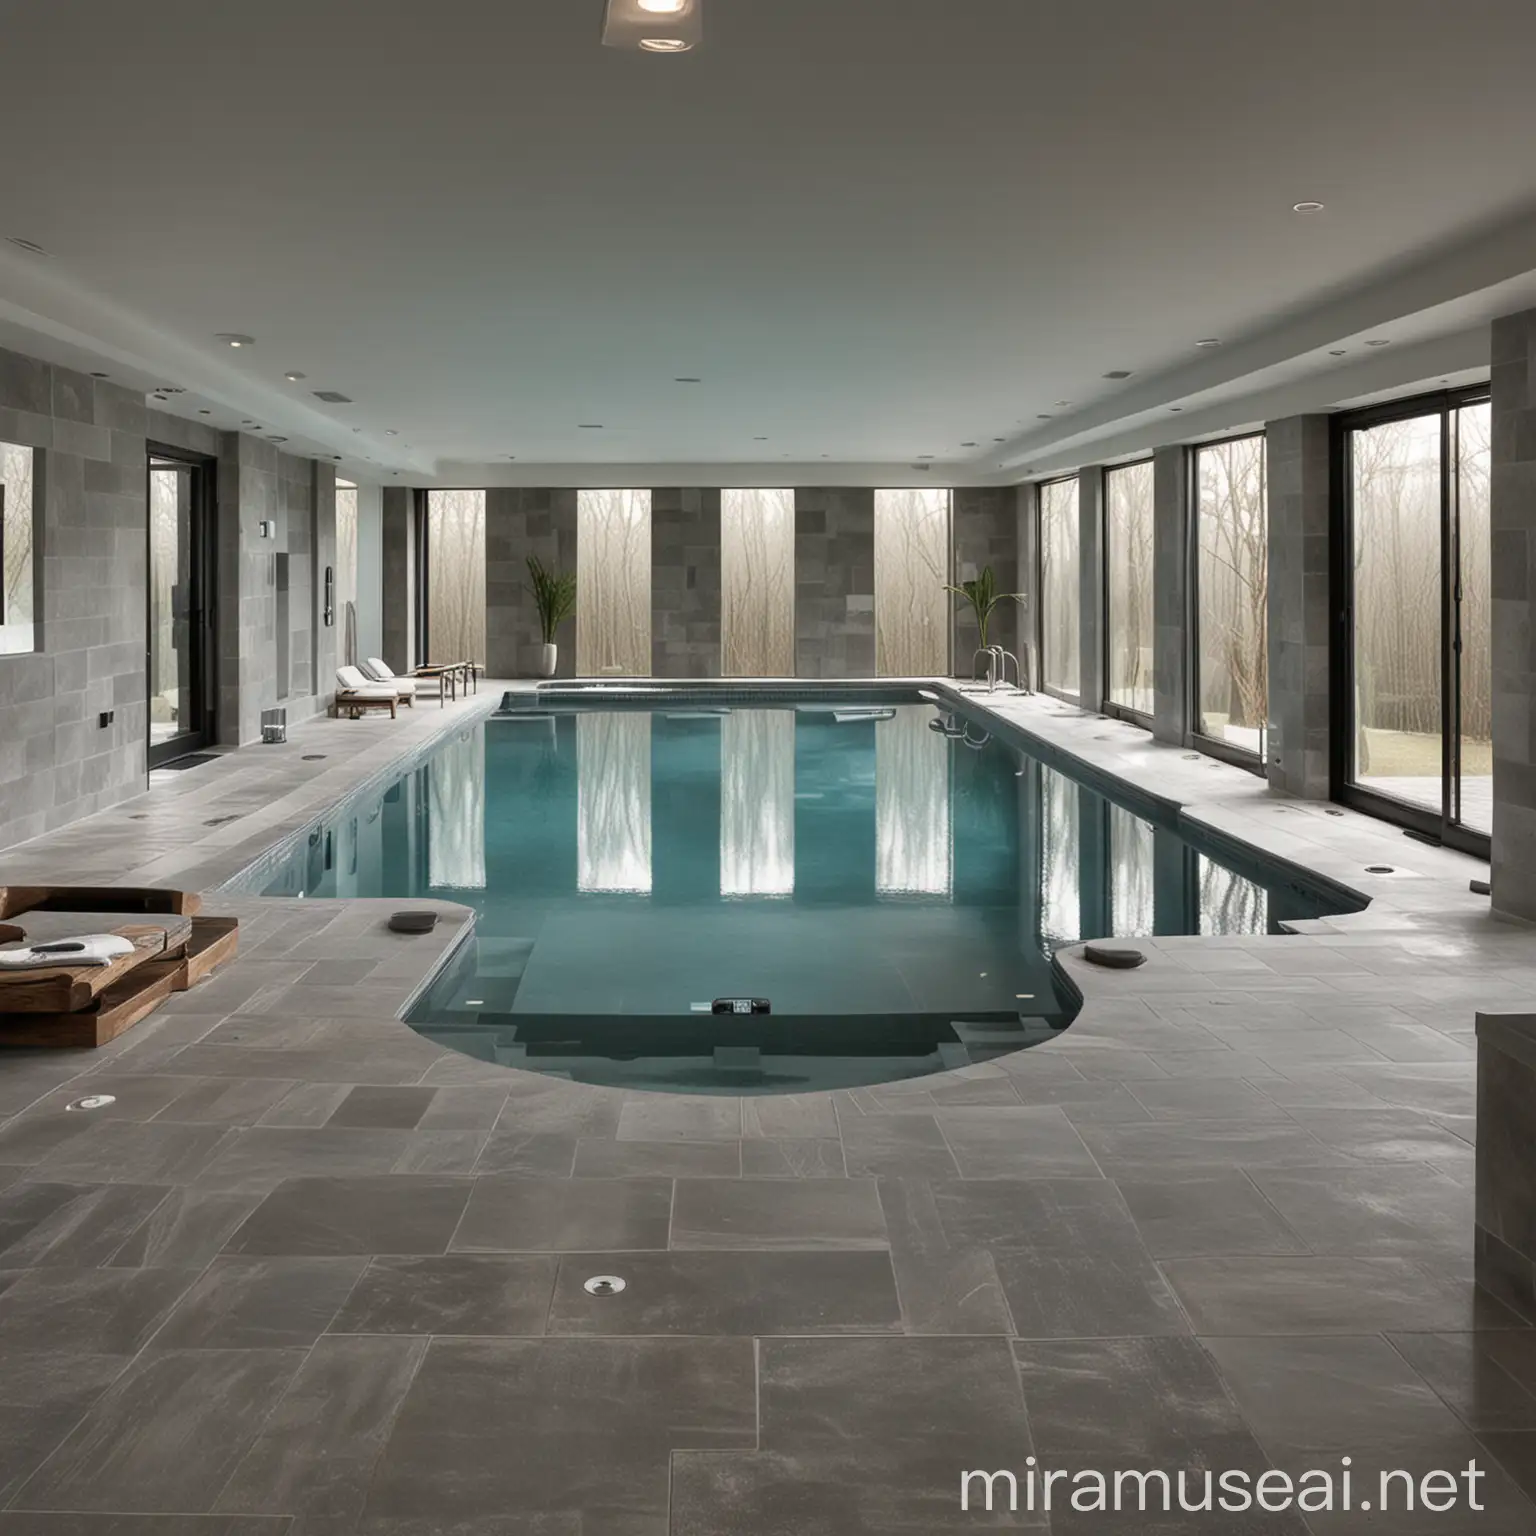 indoor square pool with a connected round hot tub.  Make the walls of the room gray